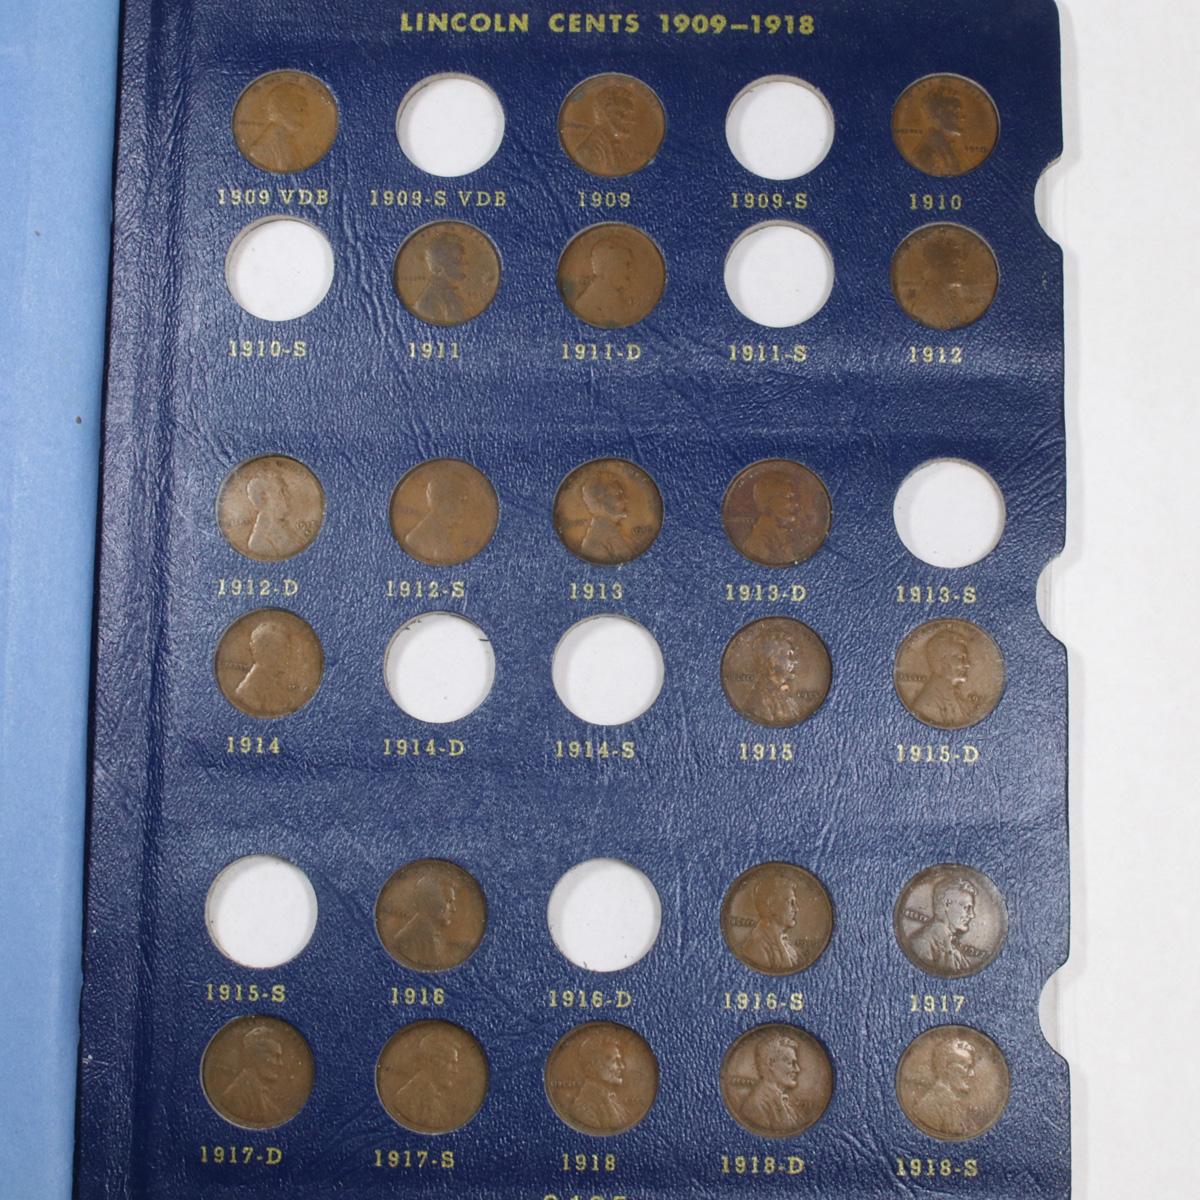 Partial Lincoln Cent Book 1909-1940 71 Coins